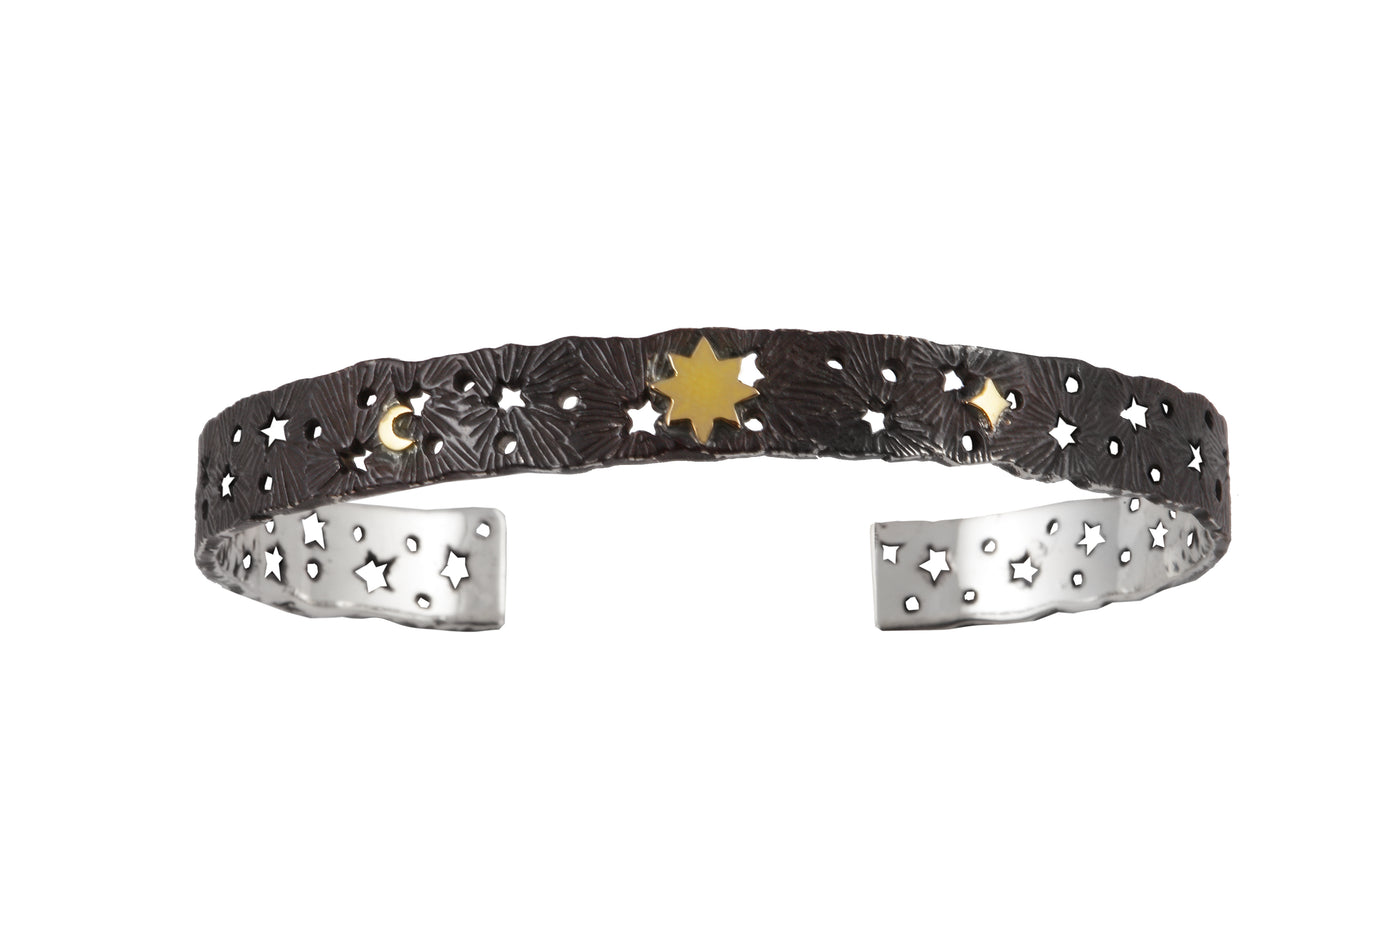 Cosmic lace silver cuff with 8-pointed star, small star and moon